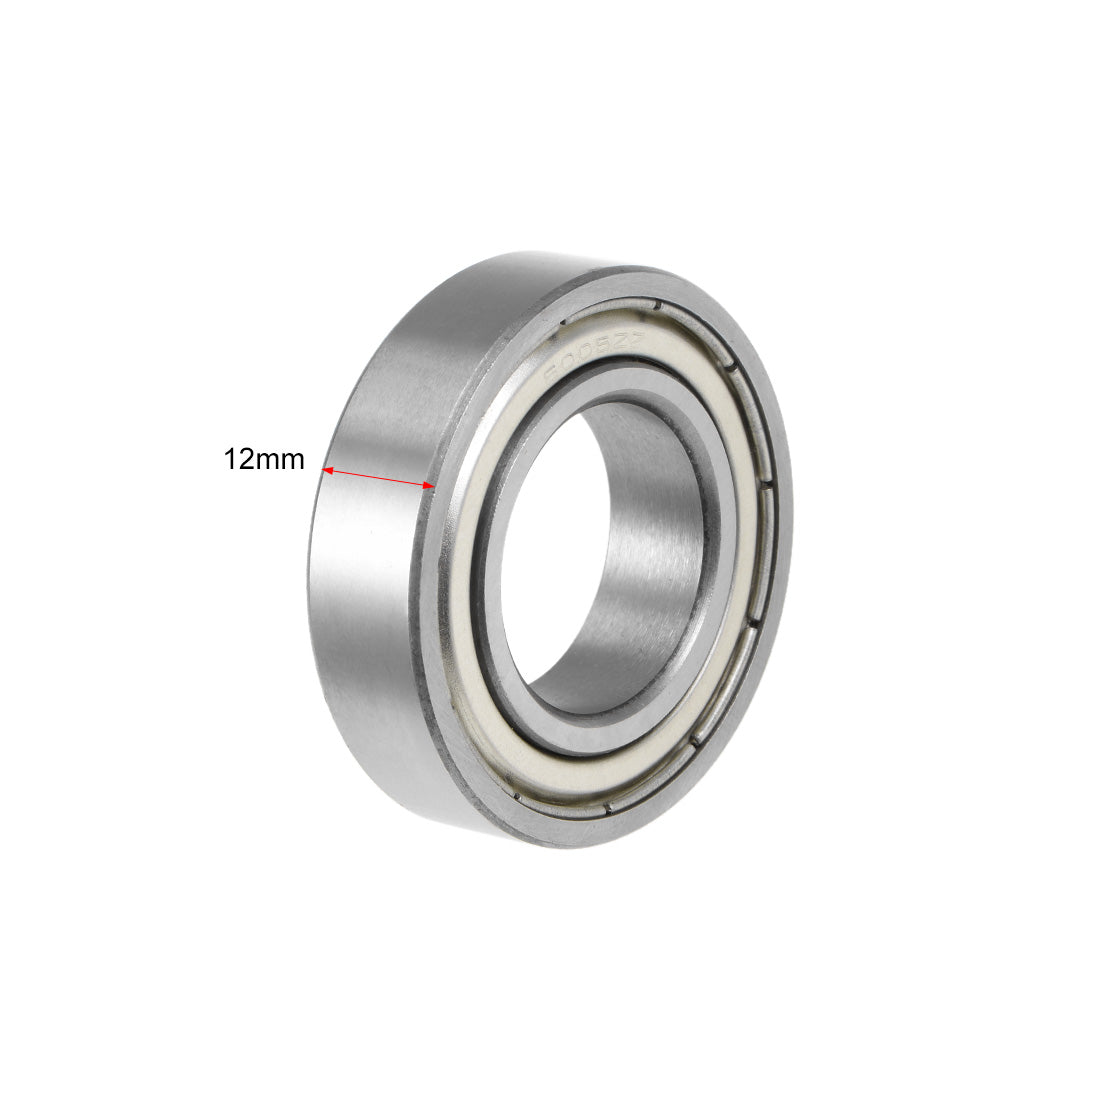 uxcell Uxcell Deep Groove Ball Bearings  Metric Double Shielded Chrome Steel ABEC1 Z1